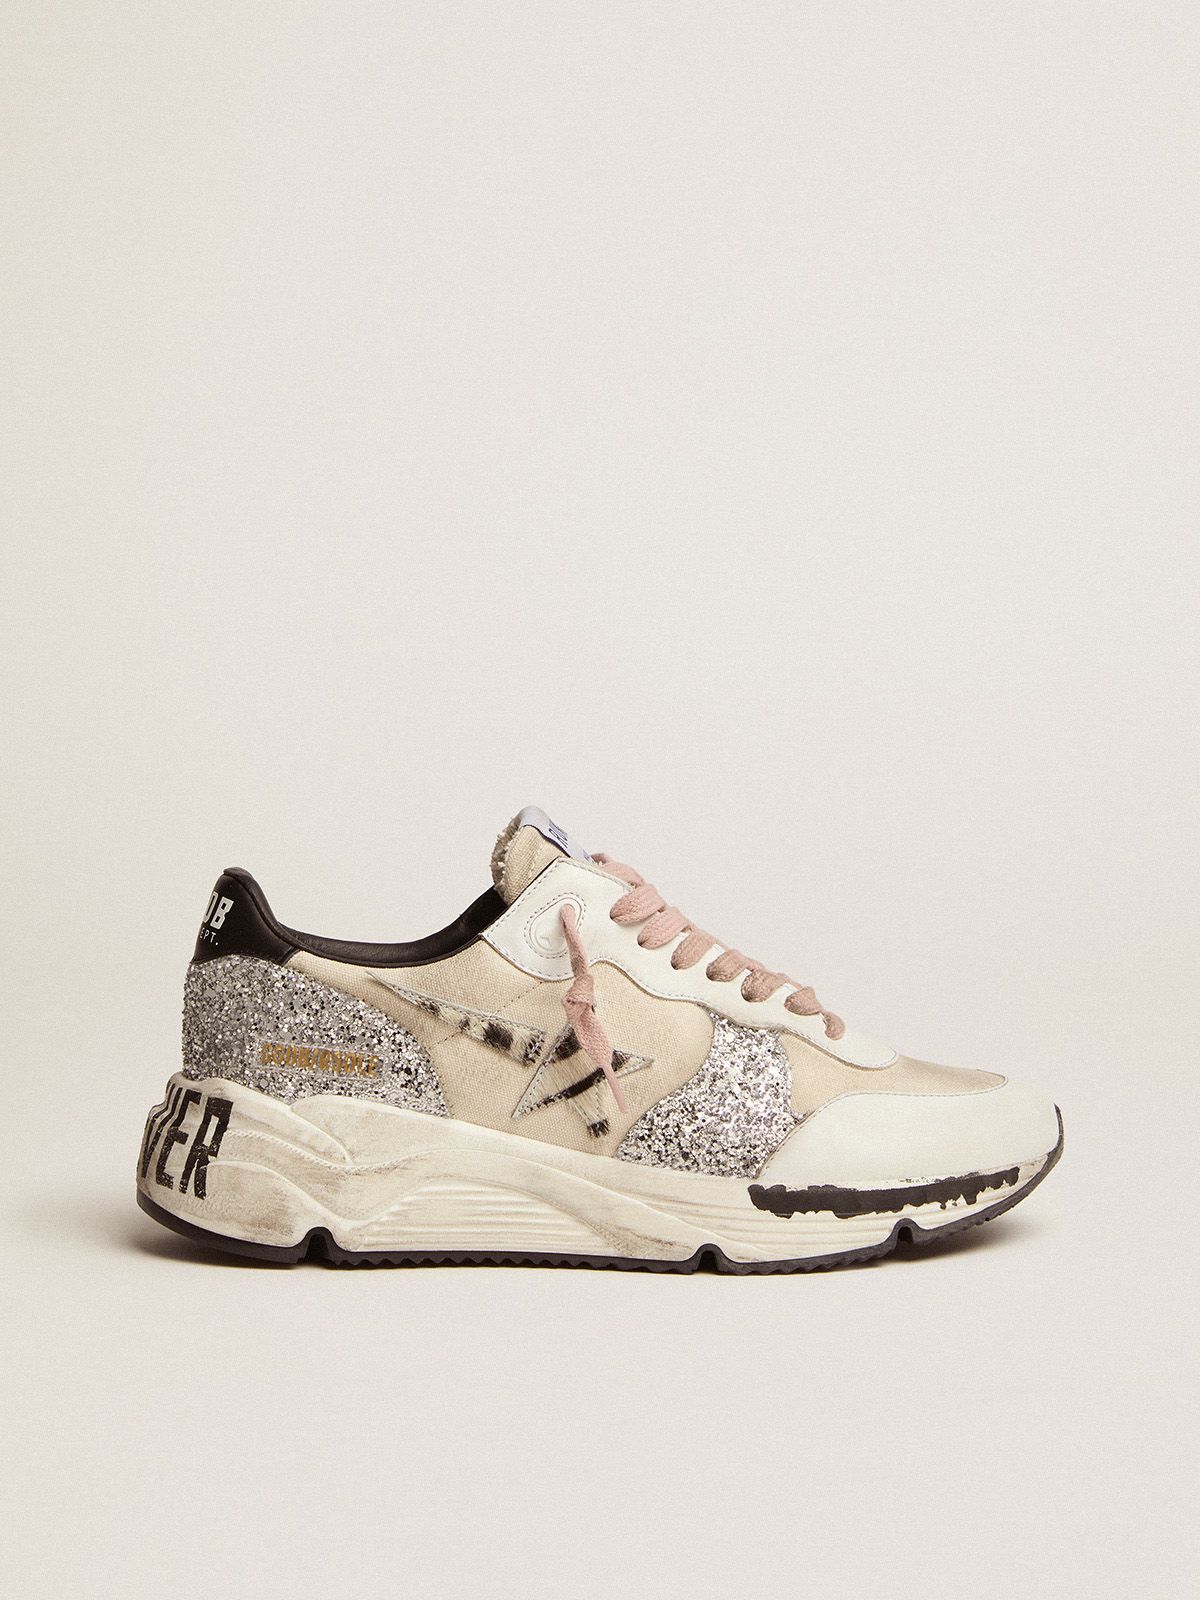 Golden Goose Ball Star Uomo Running Sole sneakers with cream canvas upper and zebra-print pony skin star